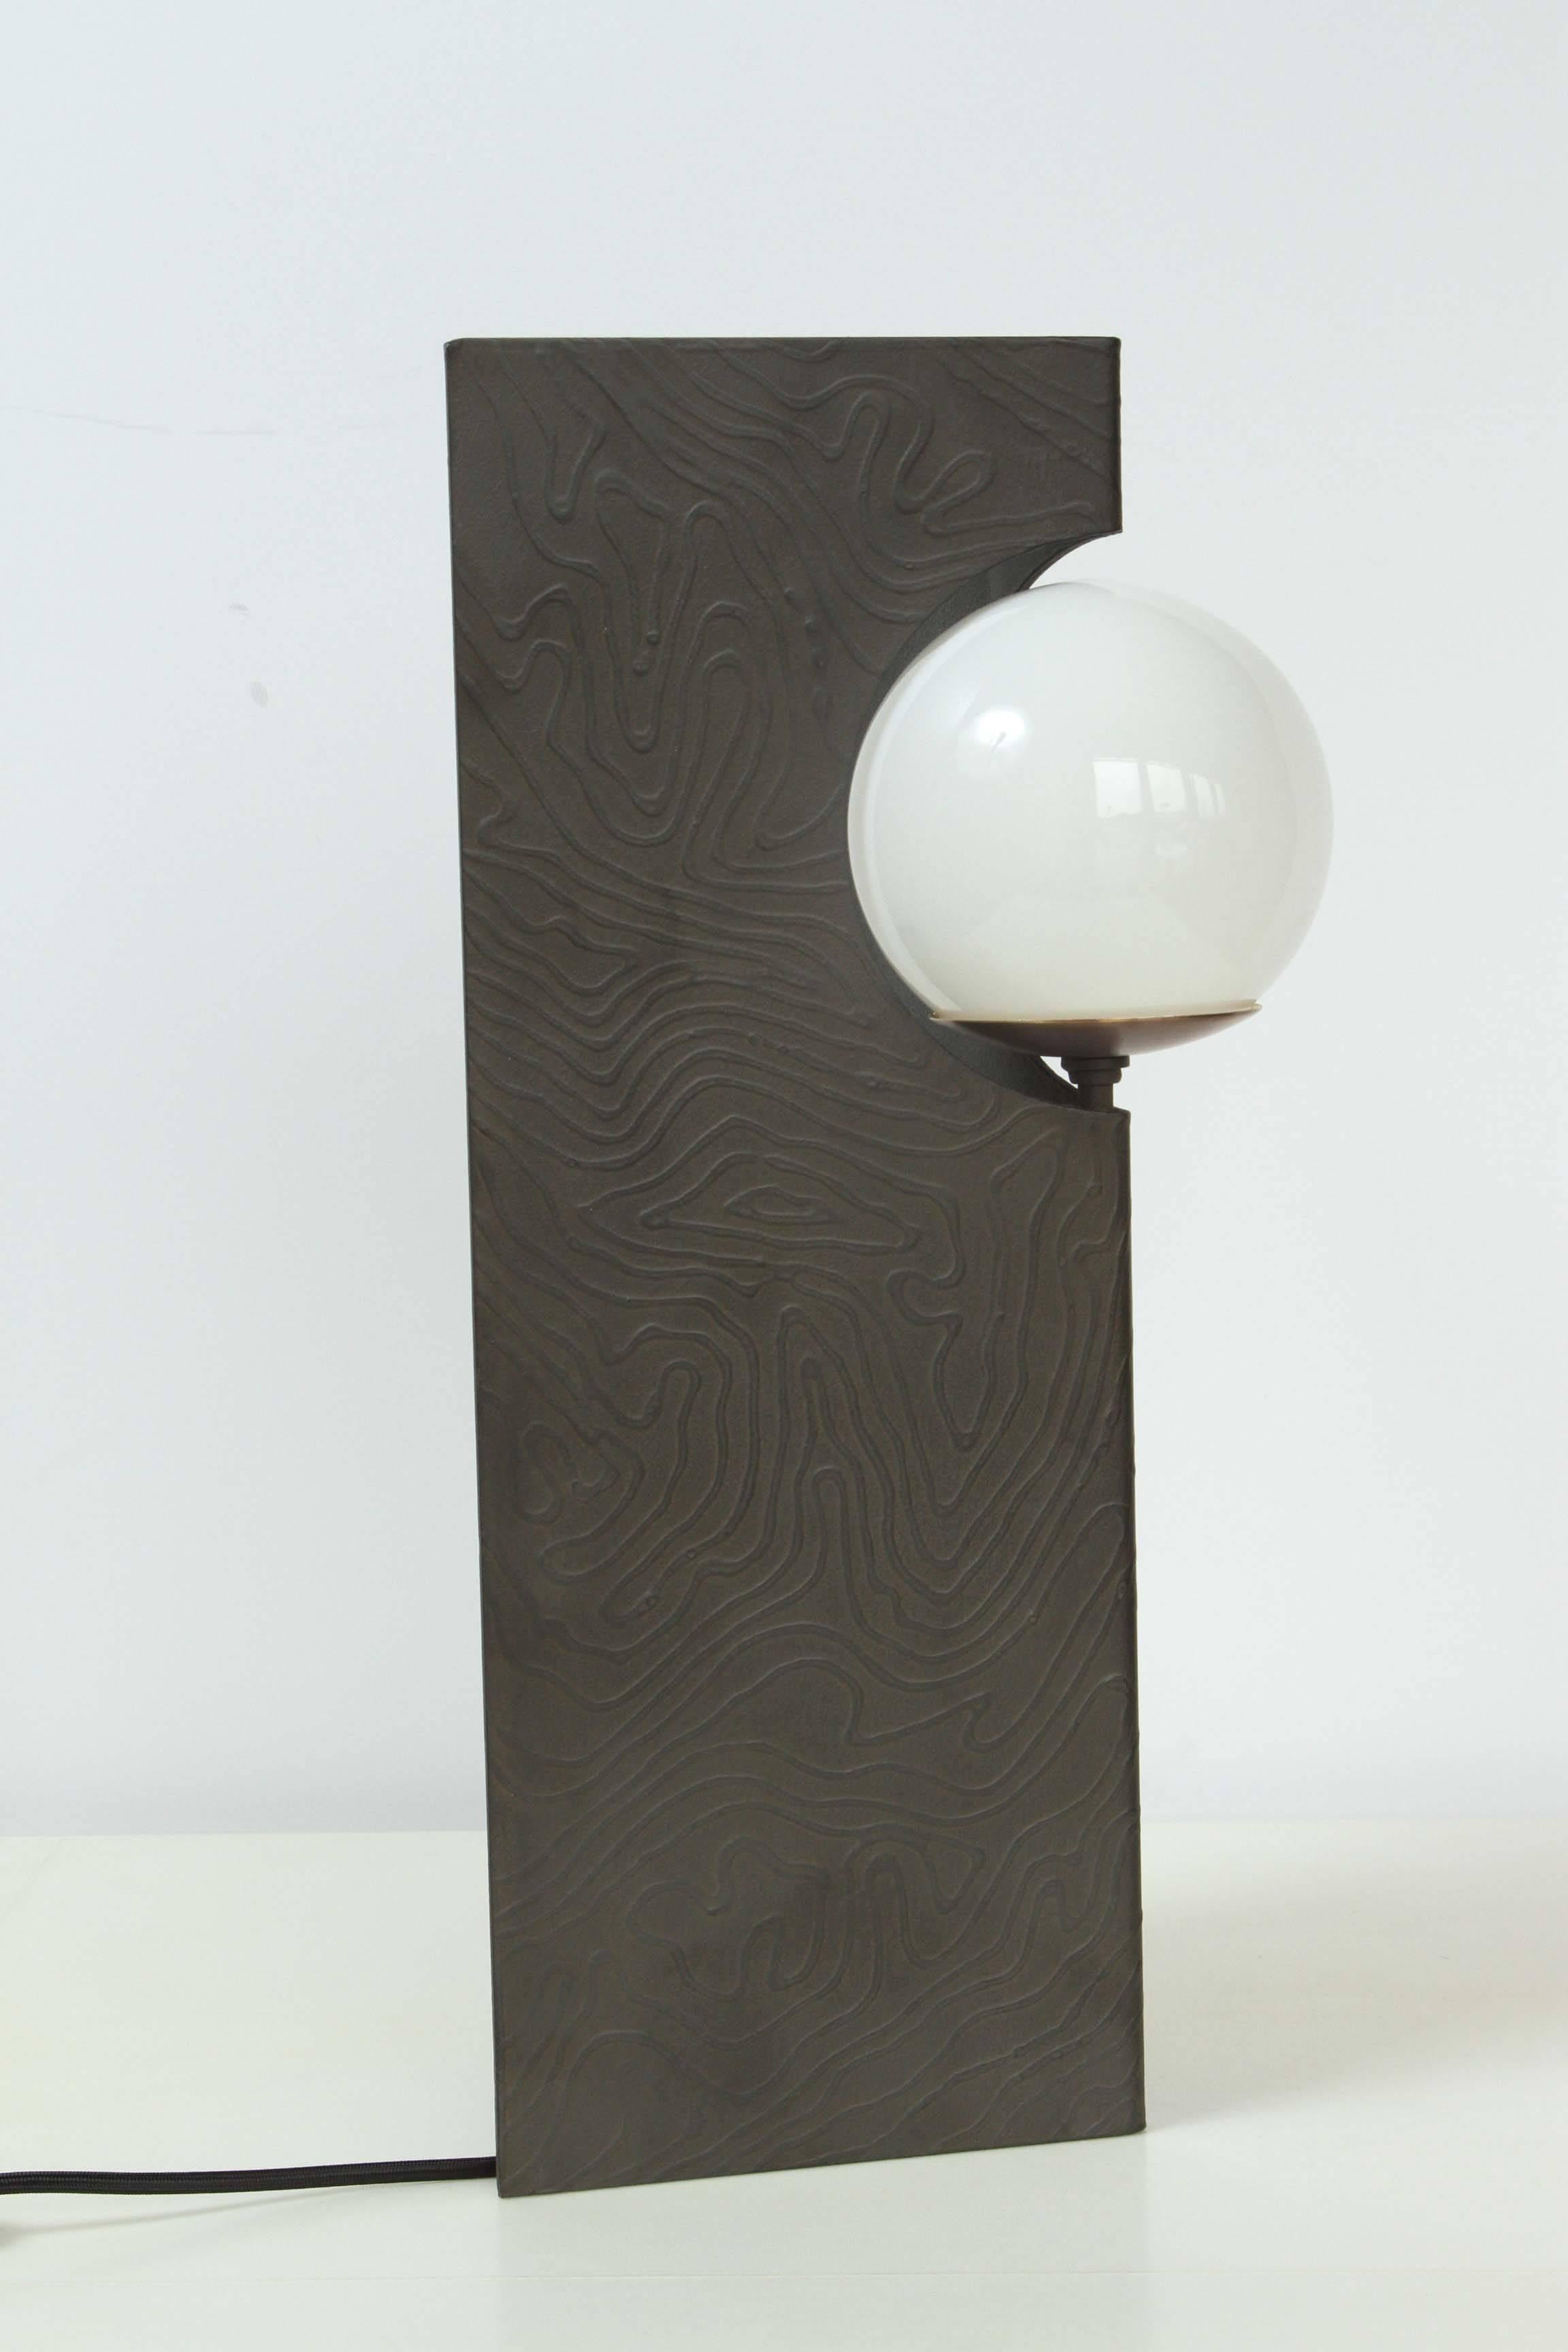 Paul Marra Textured Steel Solitaire Desk or Table Lamp For Sale 4